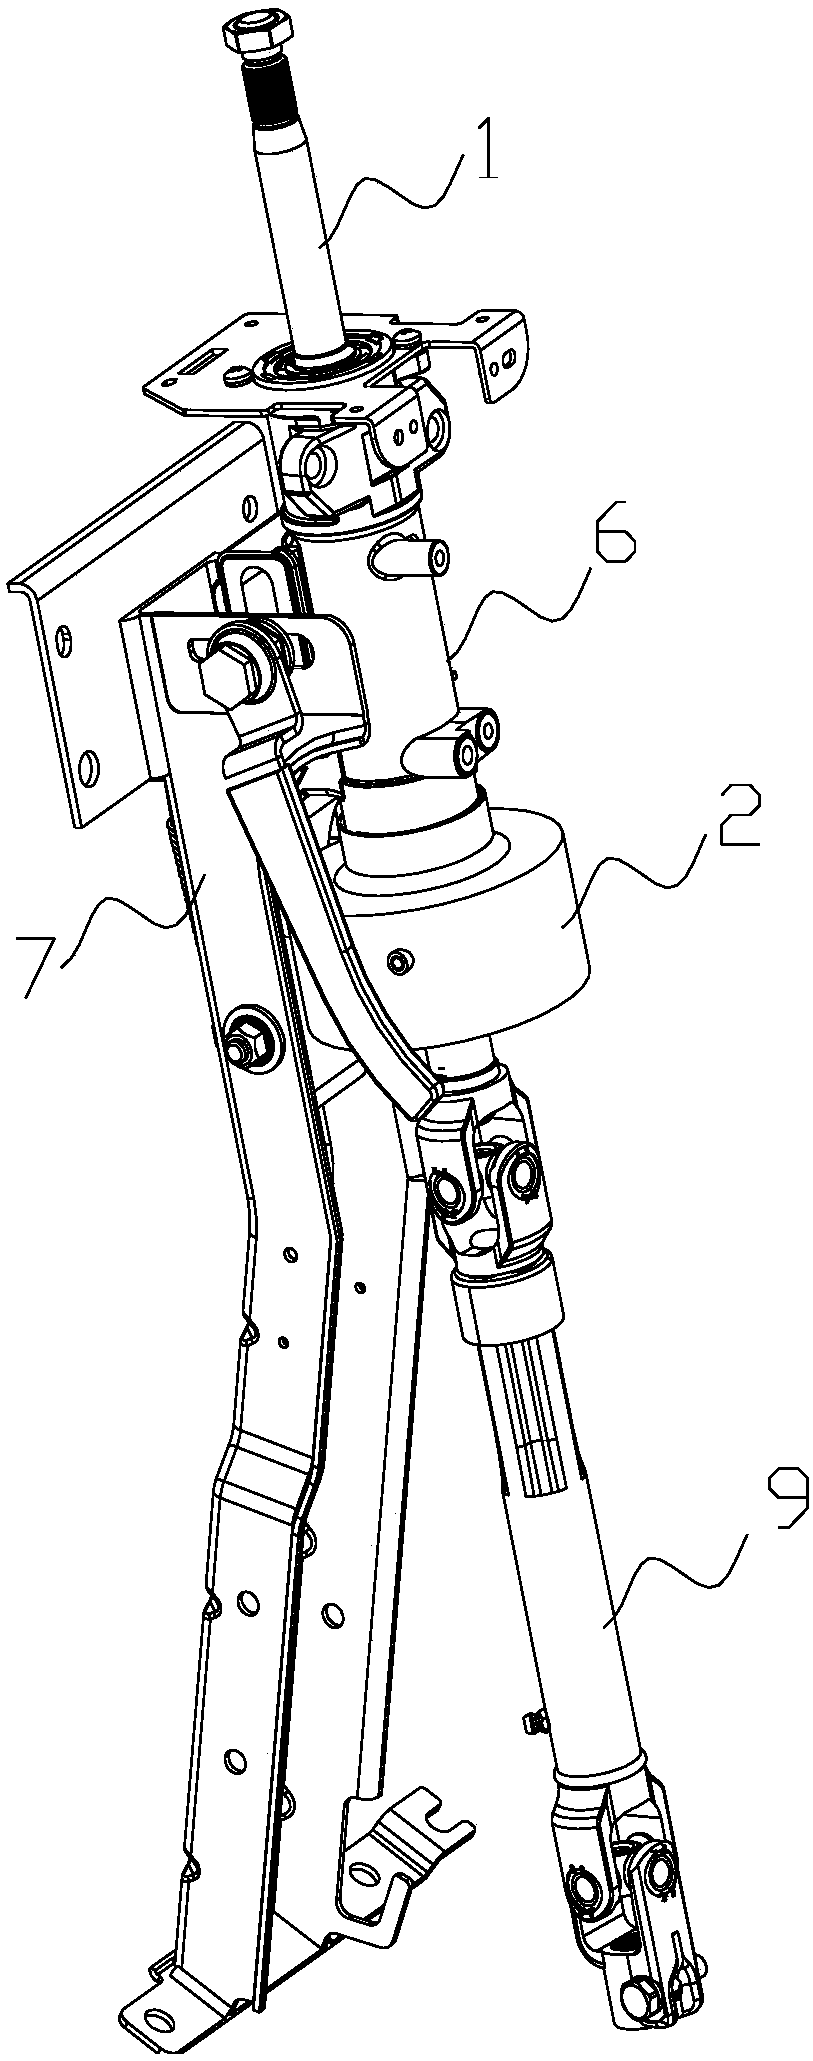 Steering column assembly and vehicle